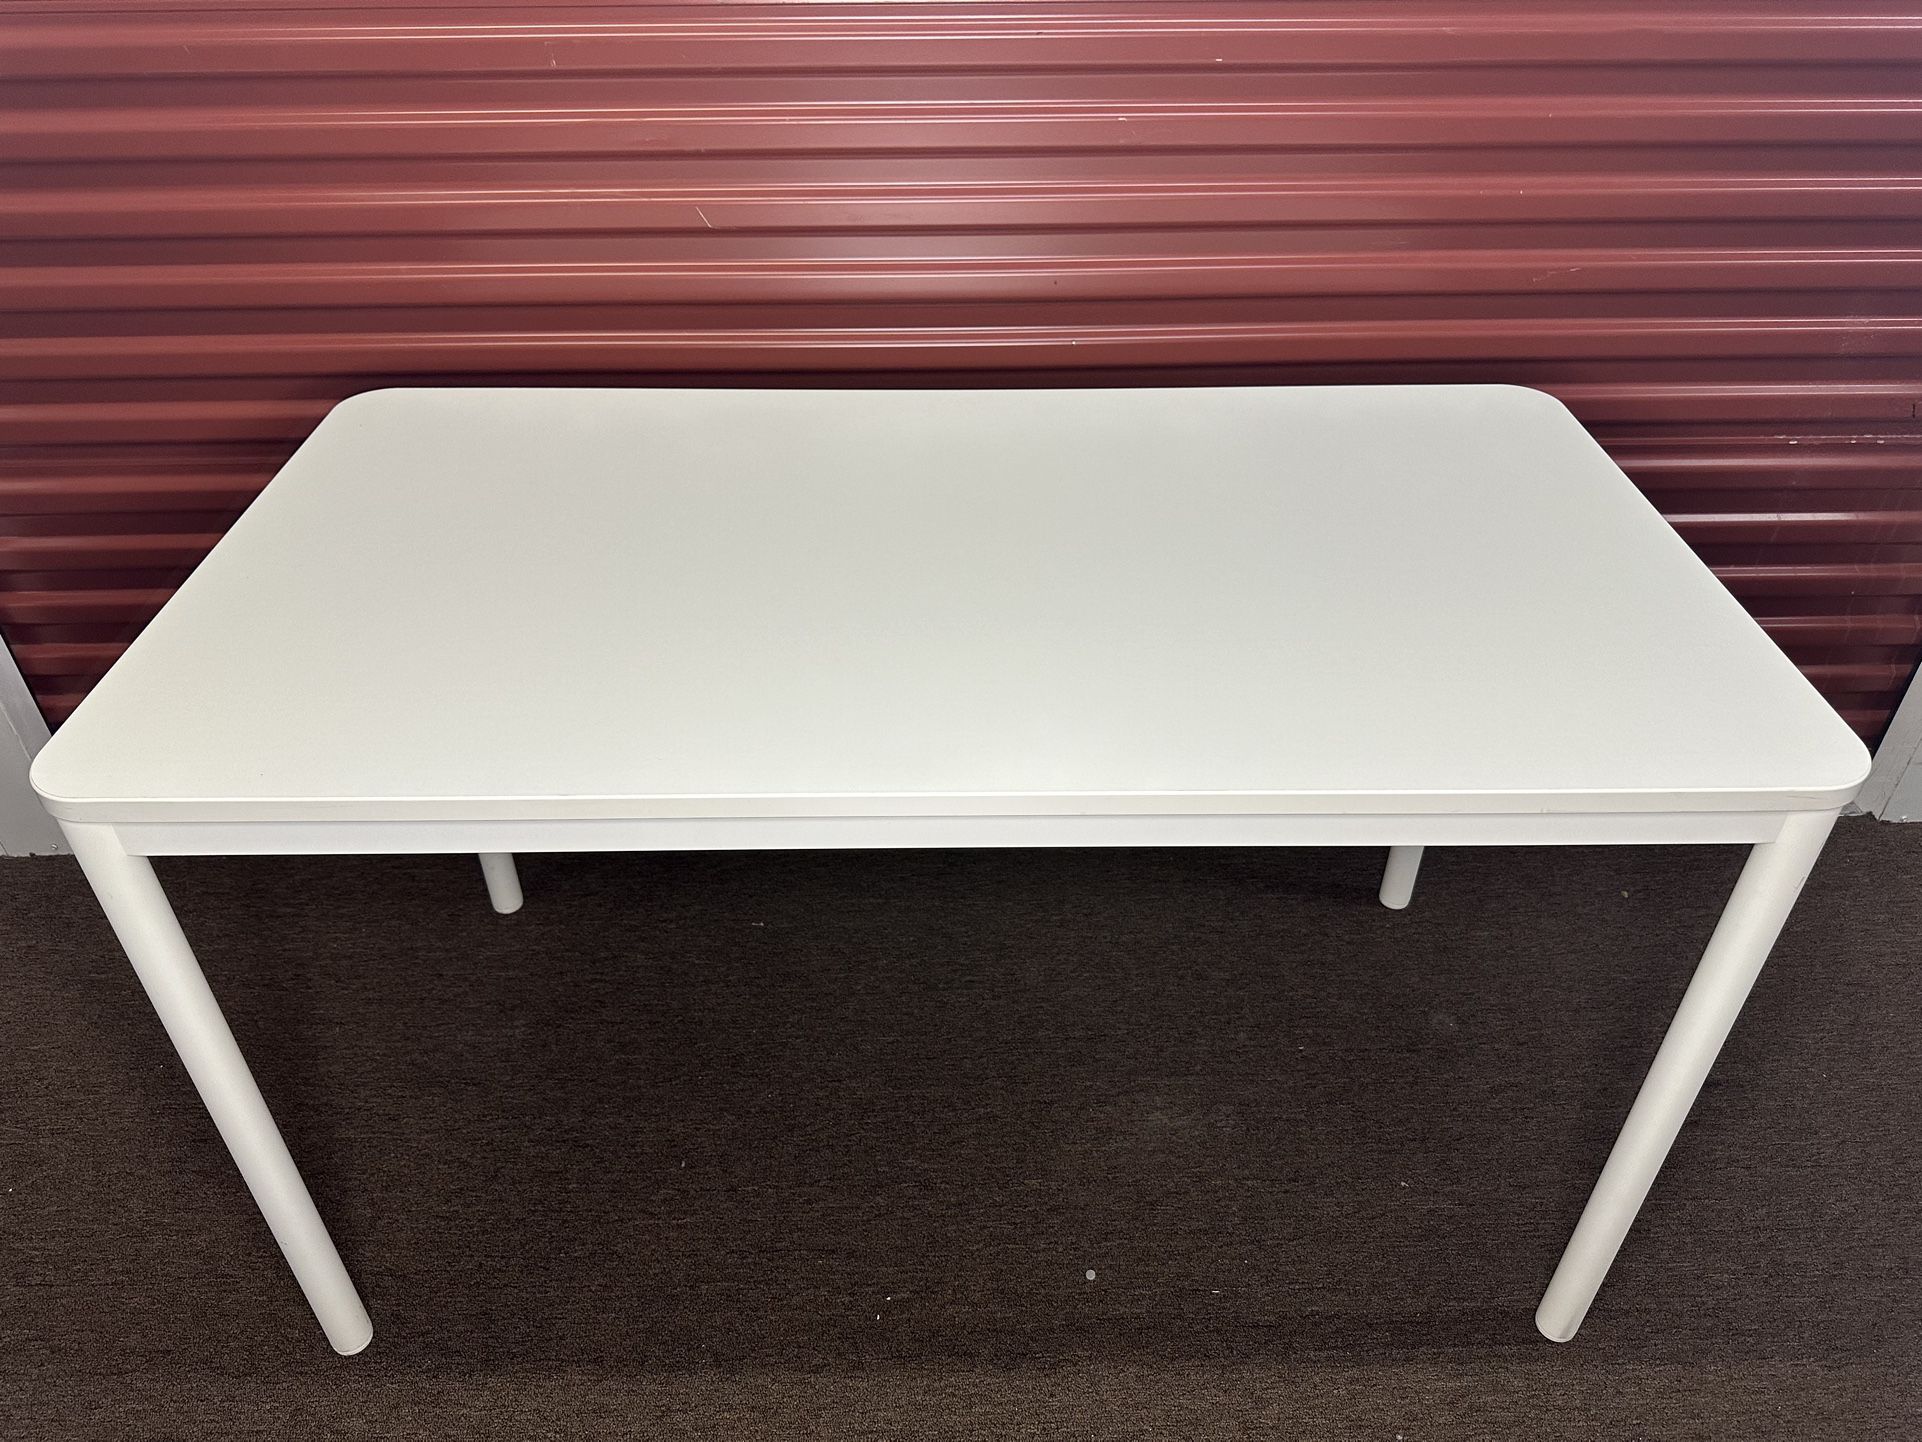 IKEA TOMMARYD WHITE METAL TABLE OFFICE HOME FURNITURE GAMING 51 1/8x27 1/2 "